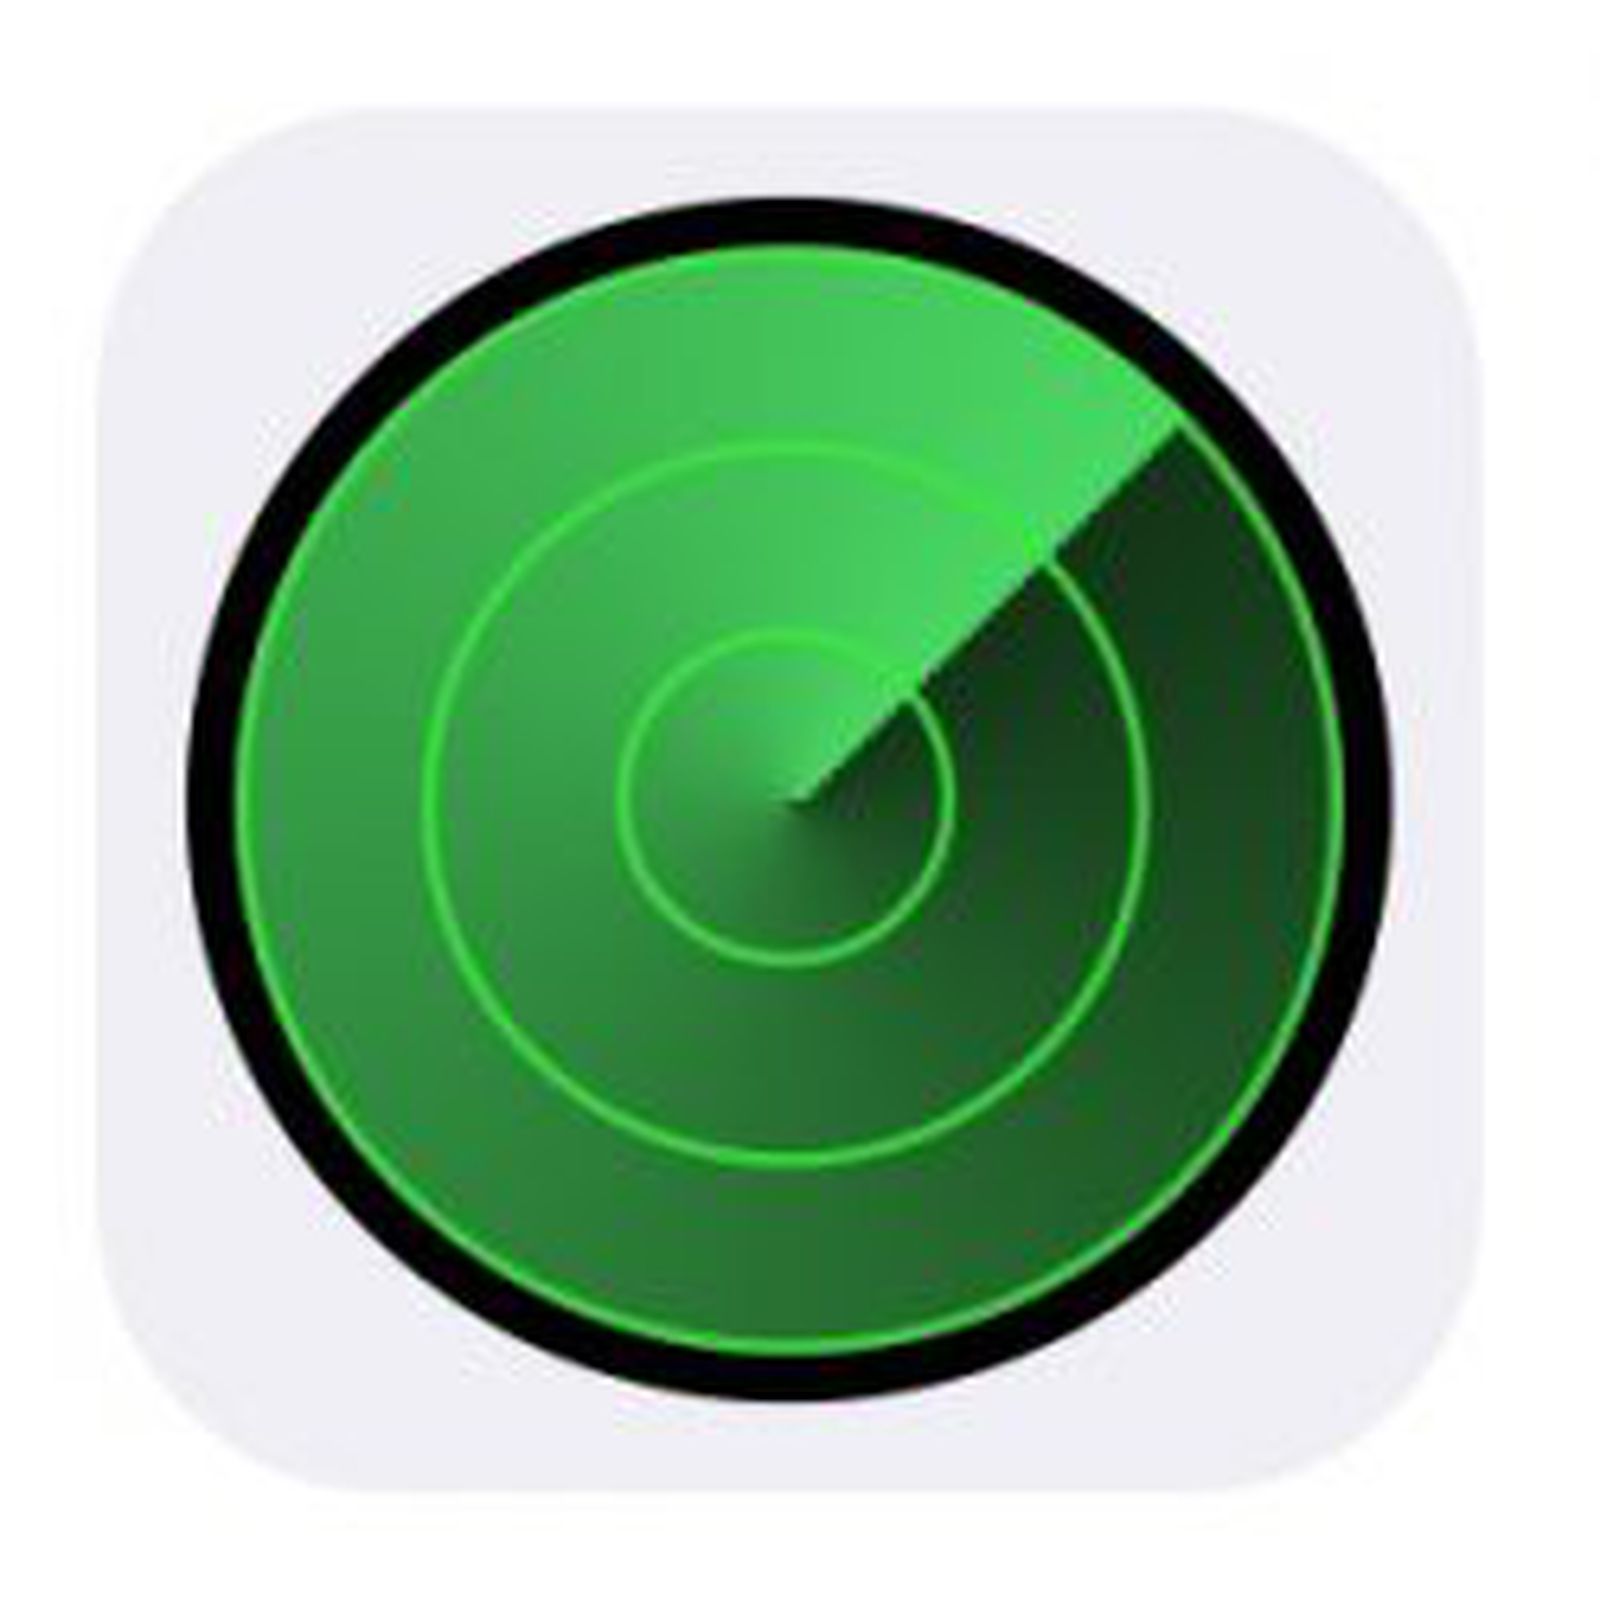 fturn off find my iphone from mac